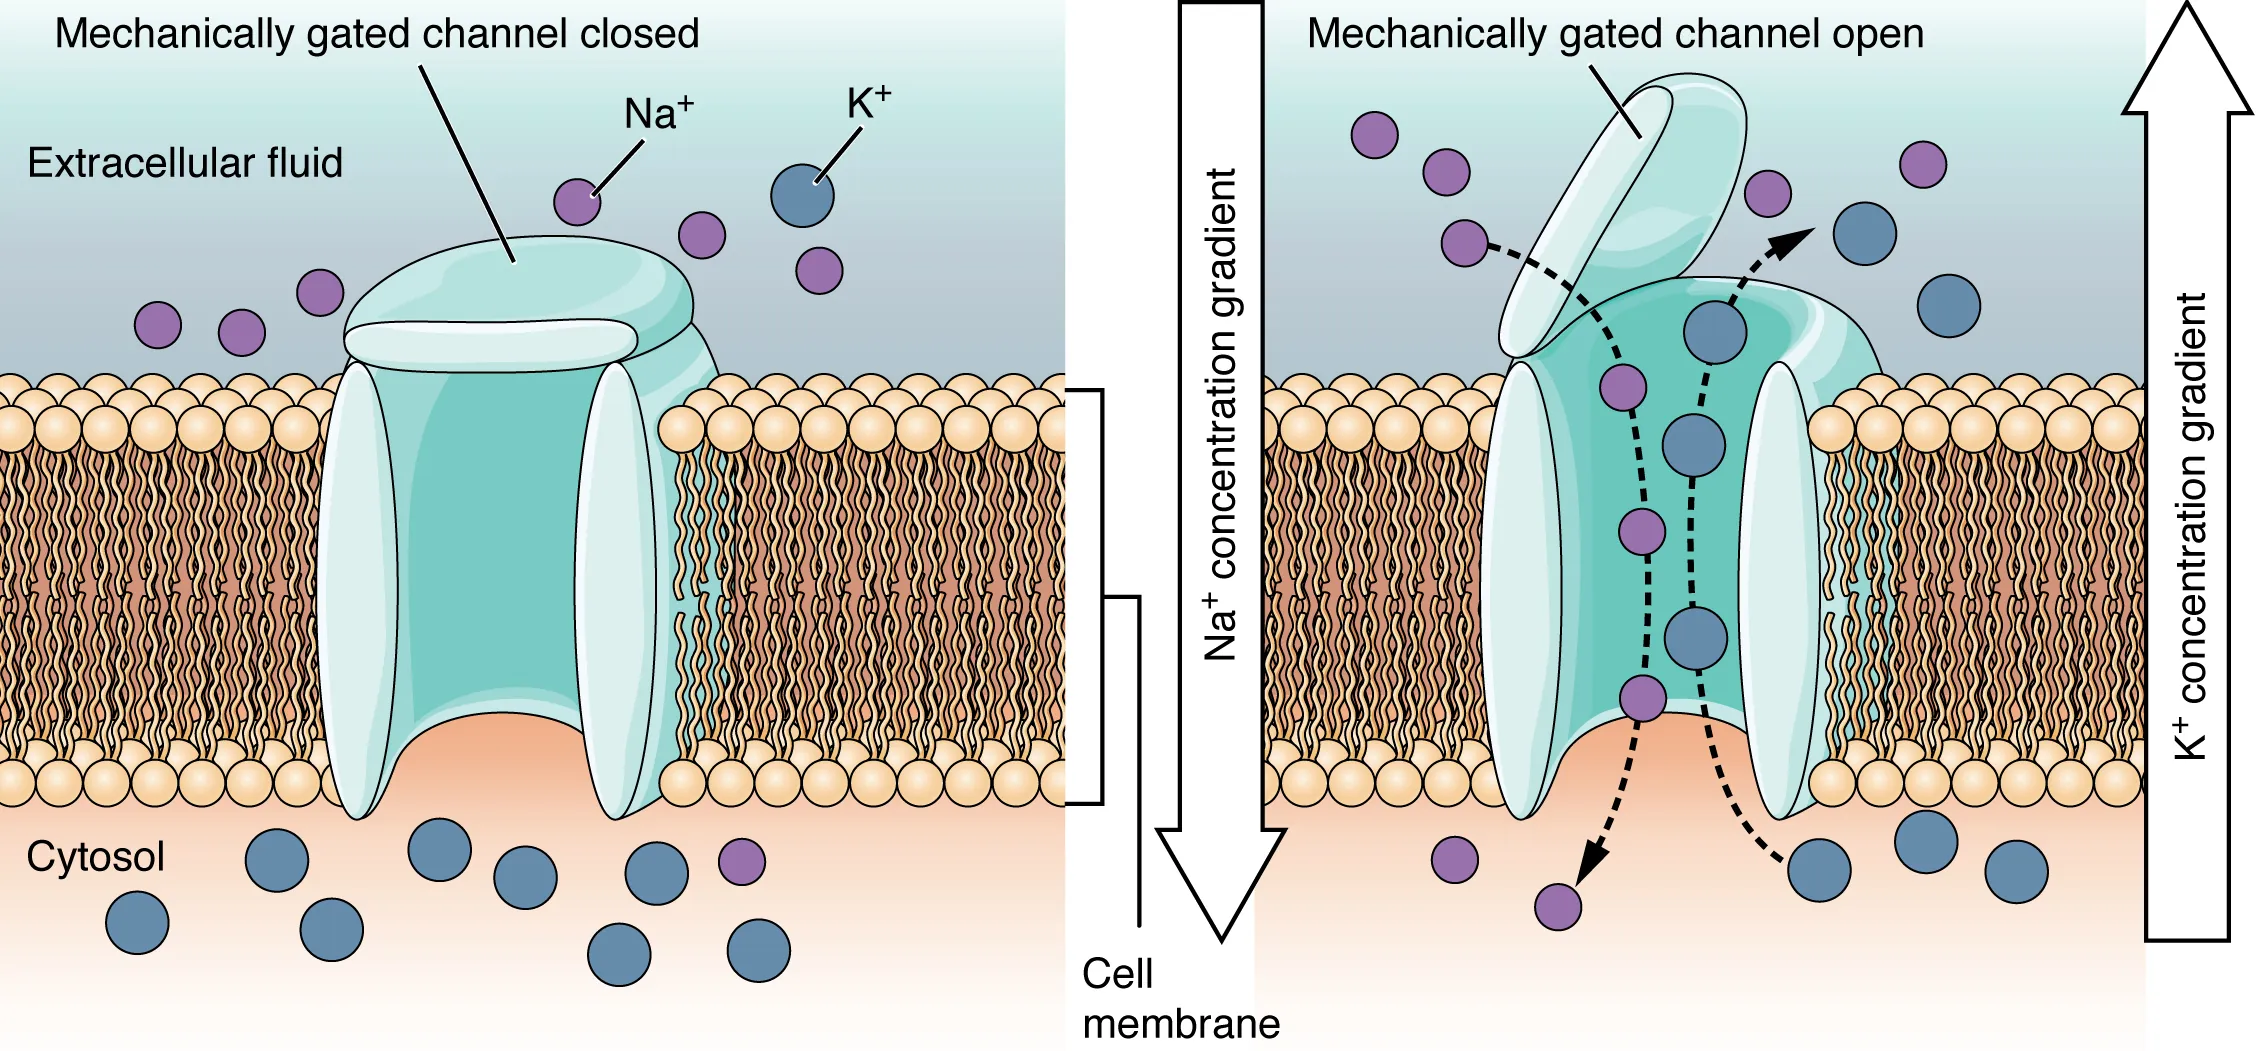 These two diagrams each show a channel protein embedded in the cell membrane. In the left diagram, there are a large number of sodium ions in the extracellular fluid, but only a few sodium ions in the cytosol. There is a large number of calcium ions in the cytosol but only a few calcium ions in the extracellular fluid. In this diagram, the channel is closed, as the extracellular side has a lid, somewhat resembling that on a trash can, that is closed over the channel opening. In the right diagram, the mechanically gated channel is open.  This allows the sodium ions to flow from the extracellular fluid into the cell, down their concentration gradient. At the same time, the calcium ions are moving from the cytosol into the extracellular fluid, down their concentration gradient.